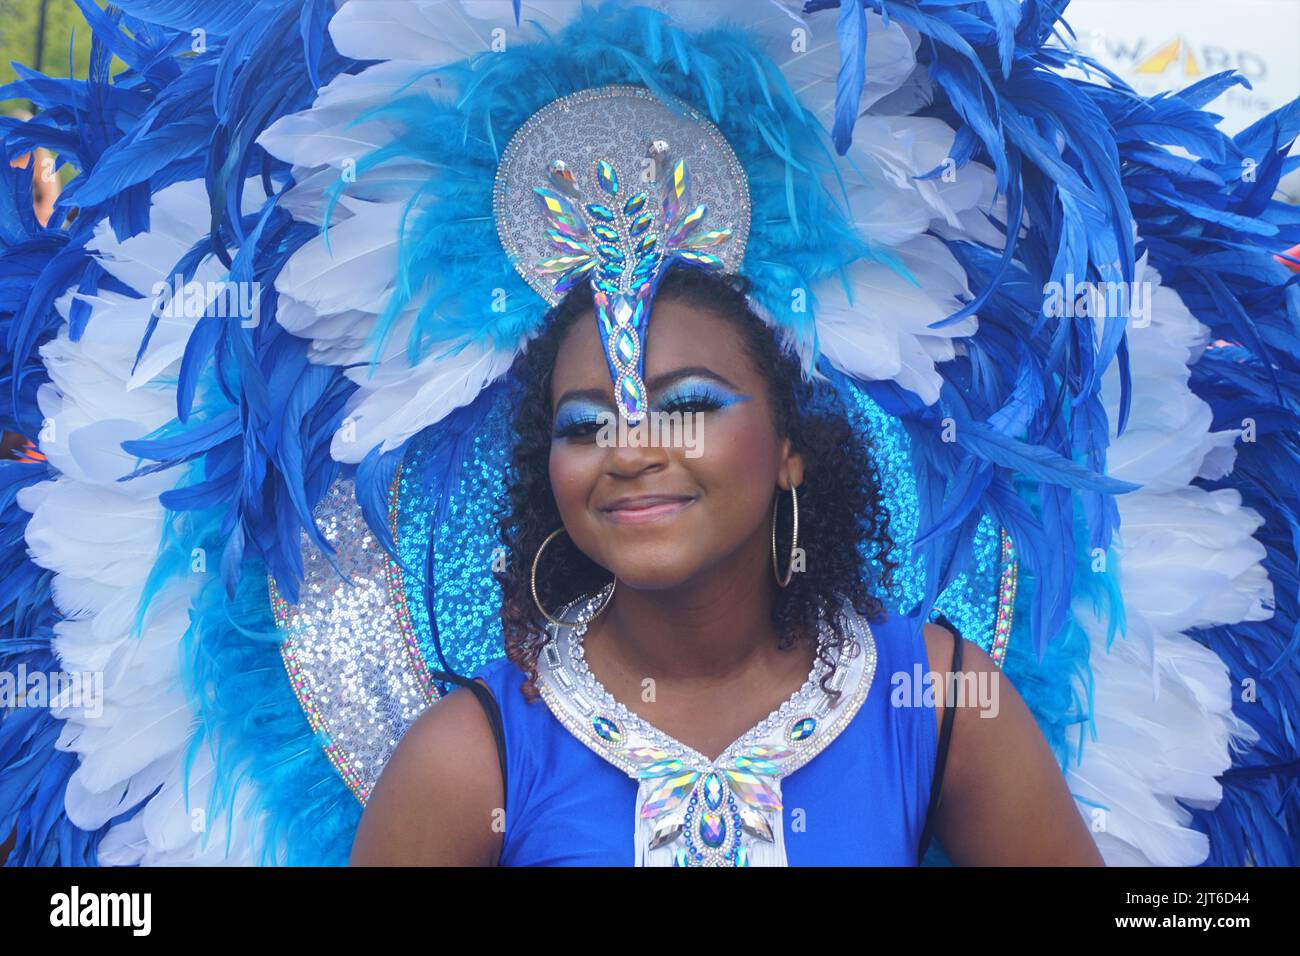 Notting Hill, London, UK. 28th Aug, 2022. Londoners and tourists alike enjoy the second day of Notting Hill Carnival. Participants dress in colourful costumes celebrating this year's event. Credit: Uwe Deffner/Alamy Live News Stock Photo